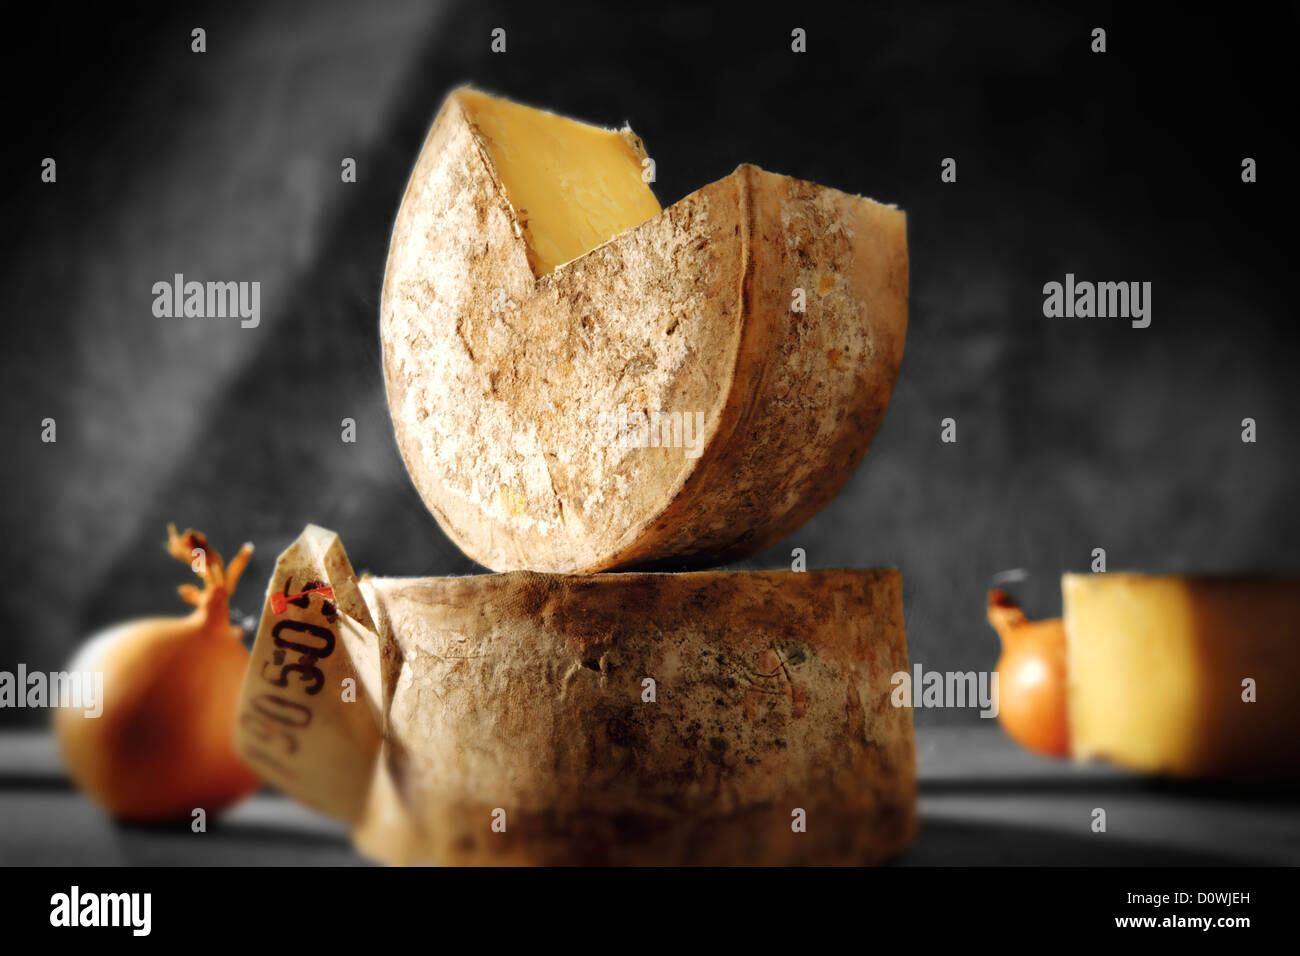 Truckle of English cheddar cheese food photos Stock Photo